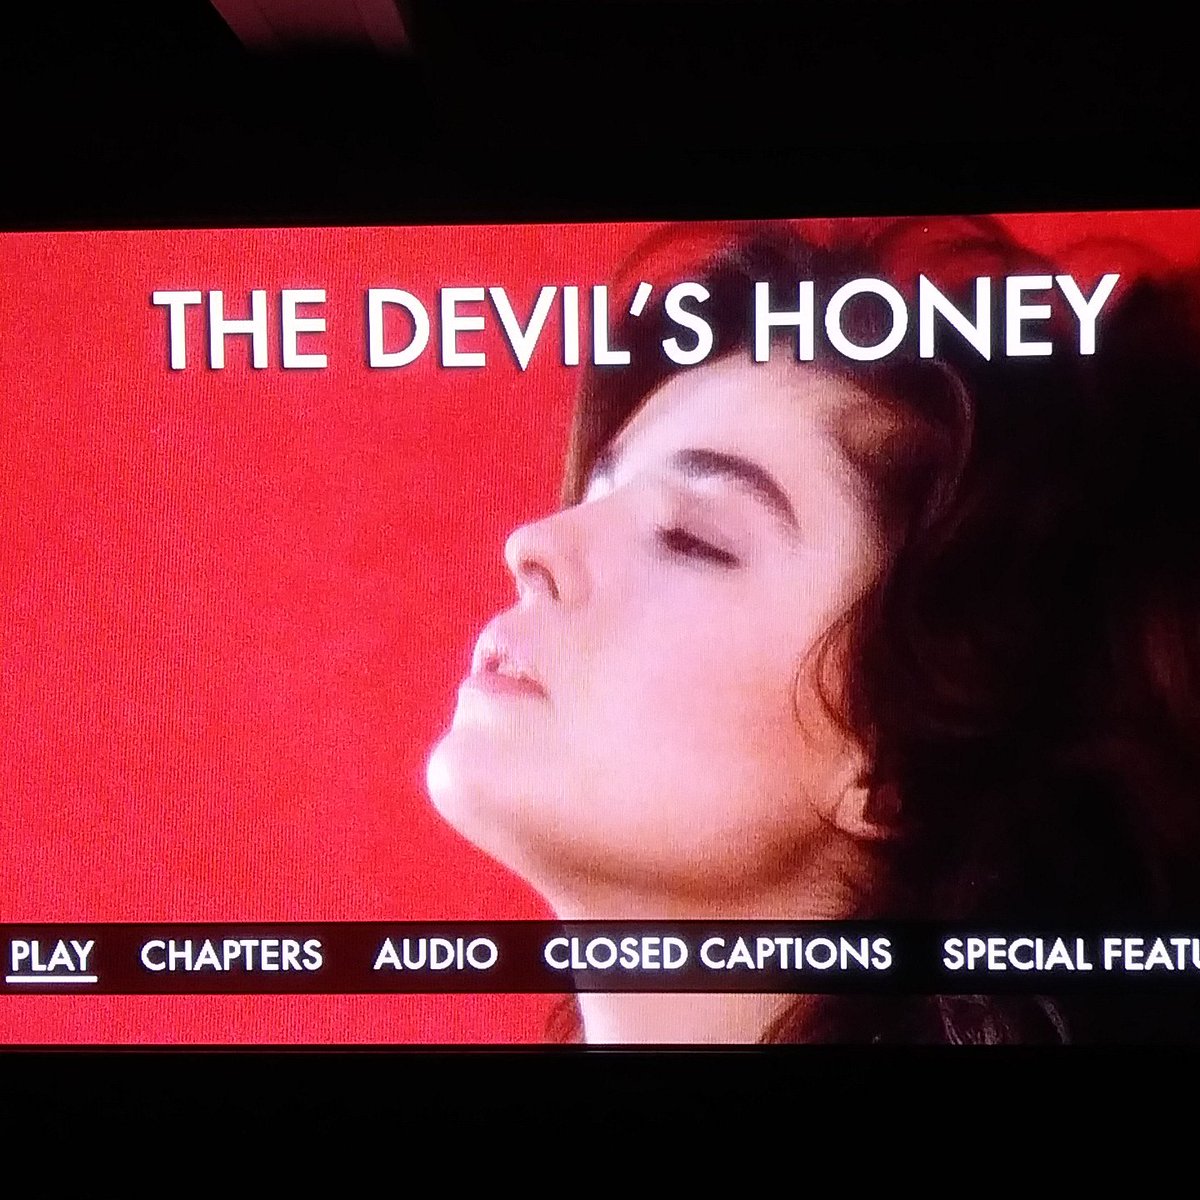 Just watched The Devil's Honey from @SeverinFilms, easily five period blood covered faces out of five 

#movies #thedevilshoney #luciofulci #severinfilms